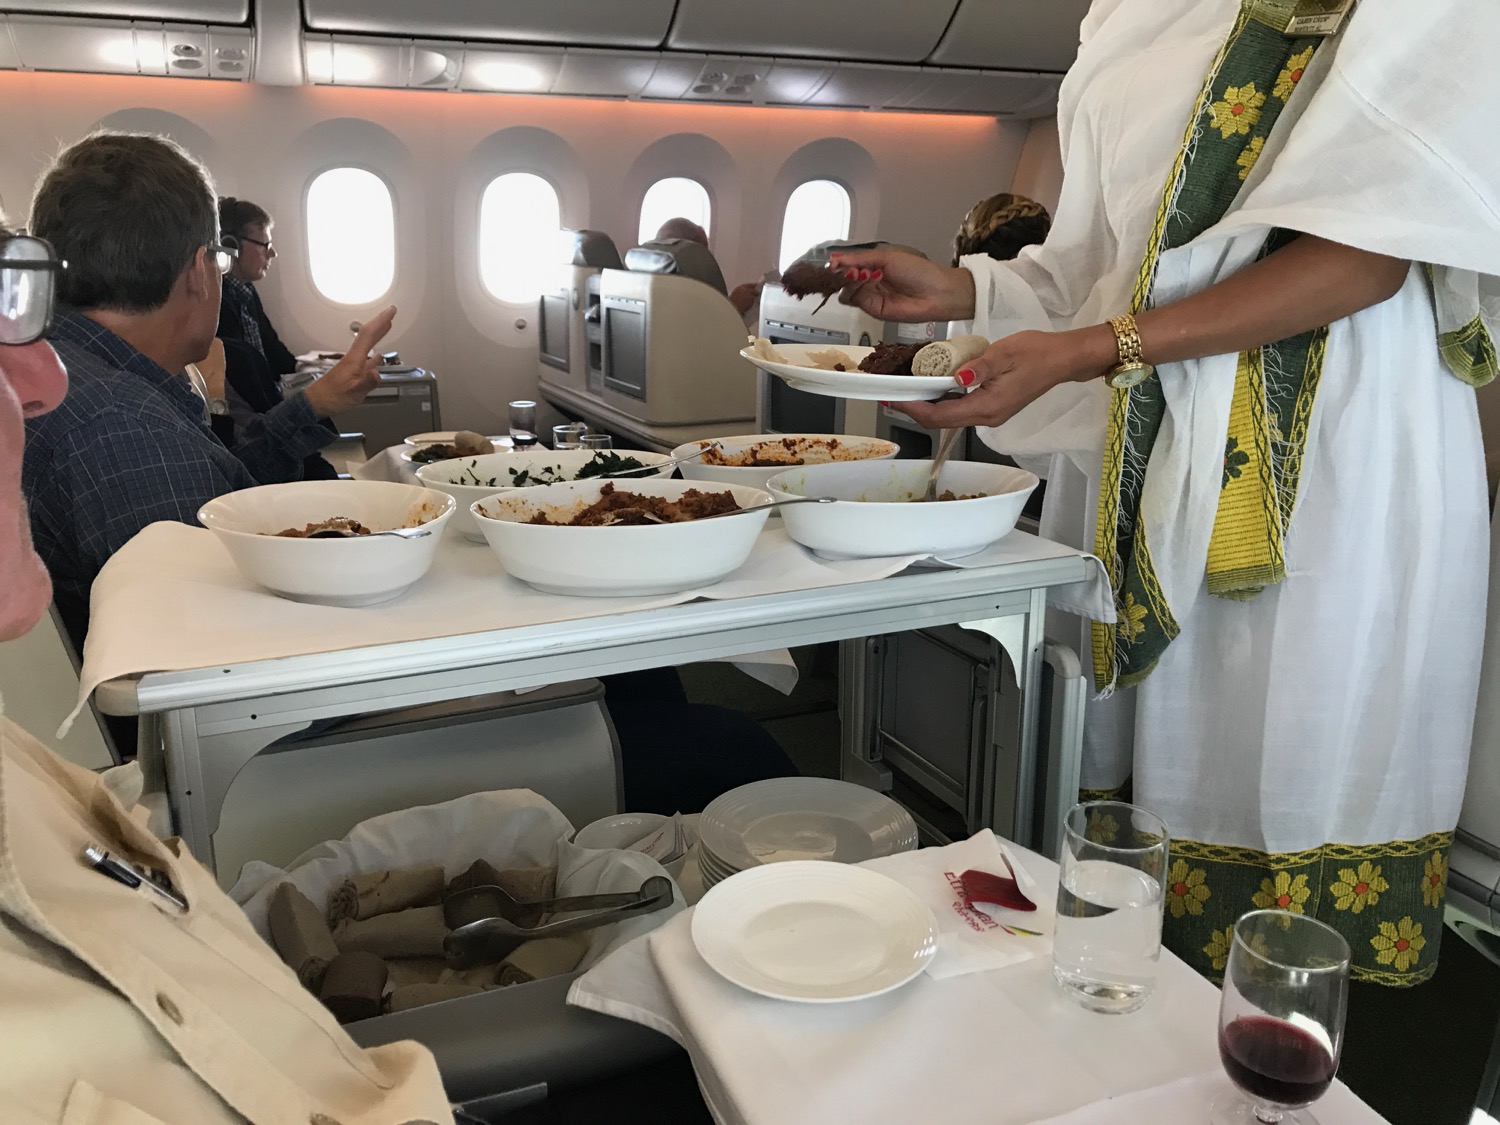 a person serving food on a table in an airplane